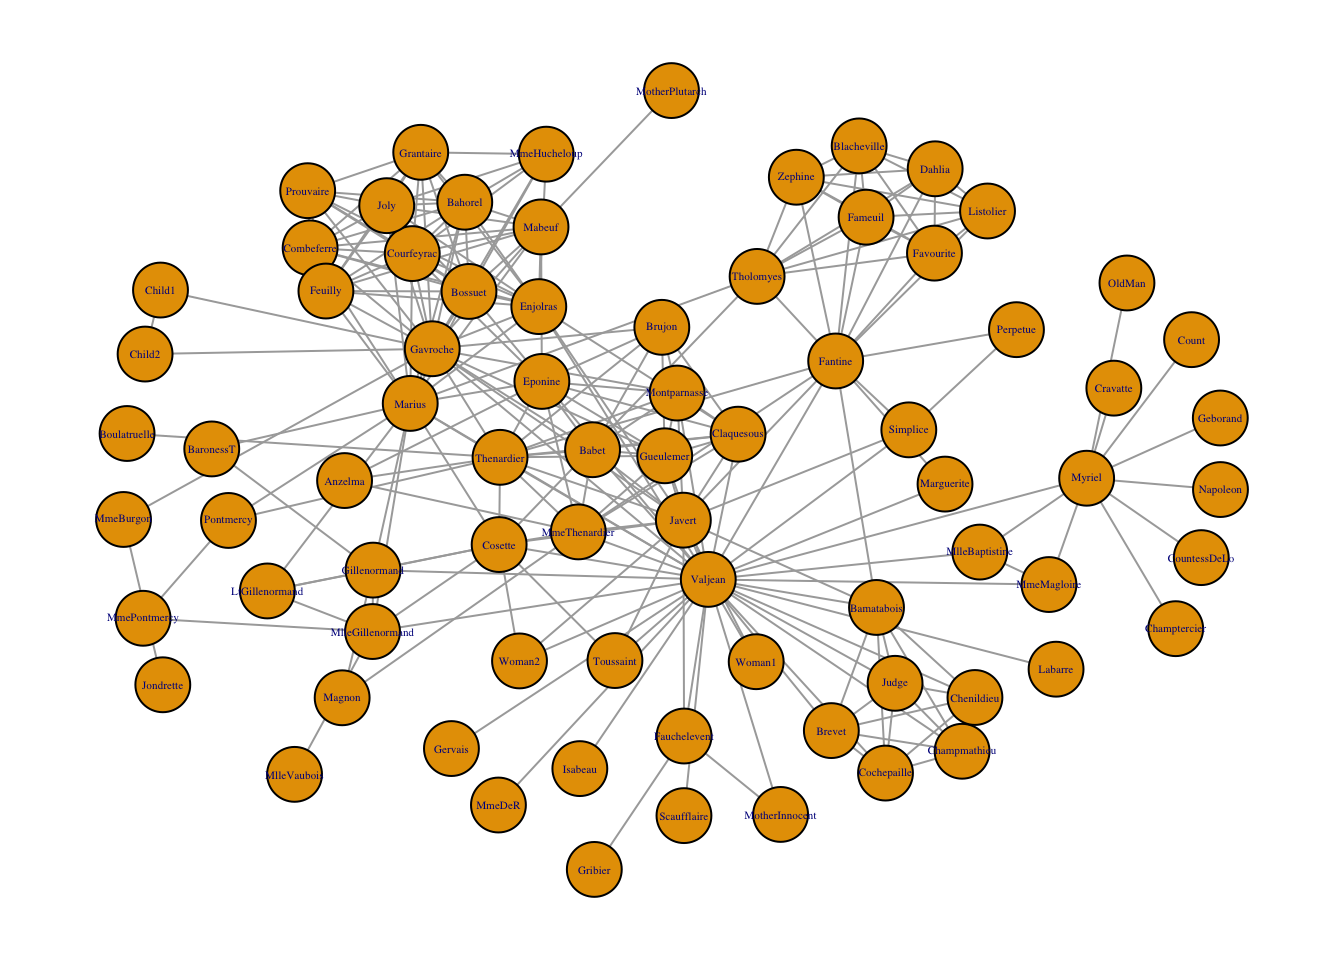 Network graph of the coappearance of characters in Les Miserable.